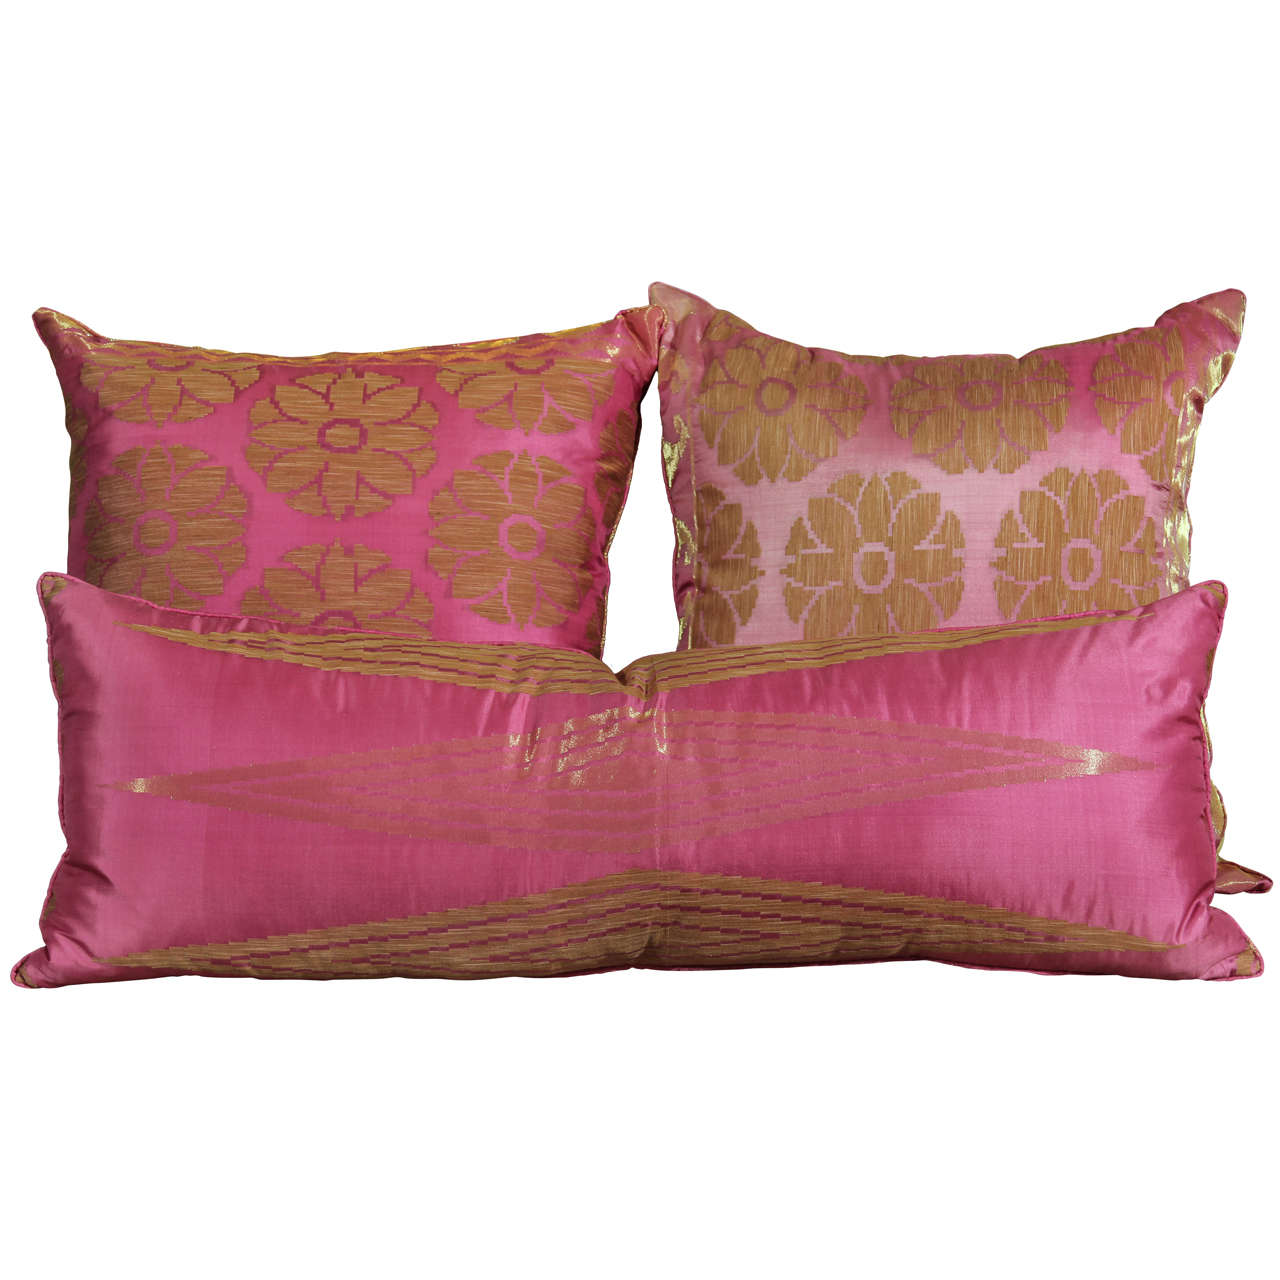 Pillows of Pink and Gold For Sale